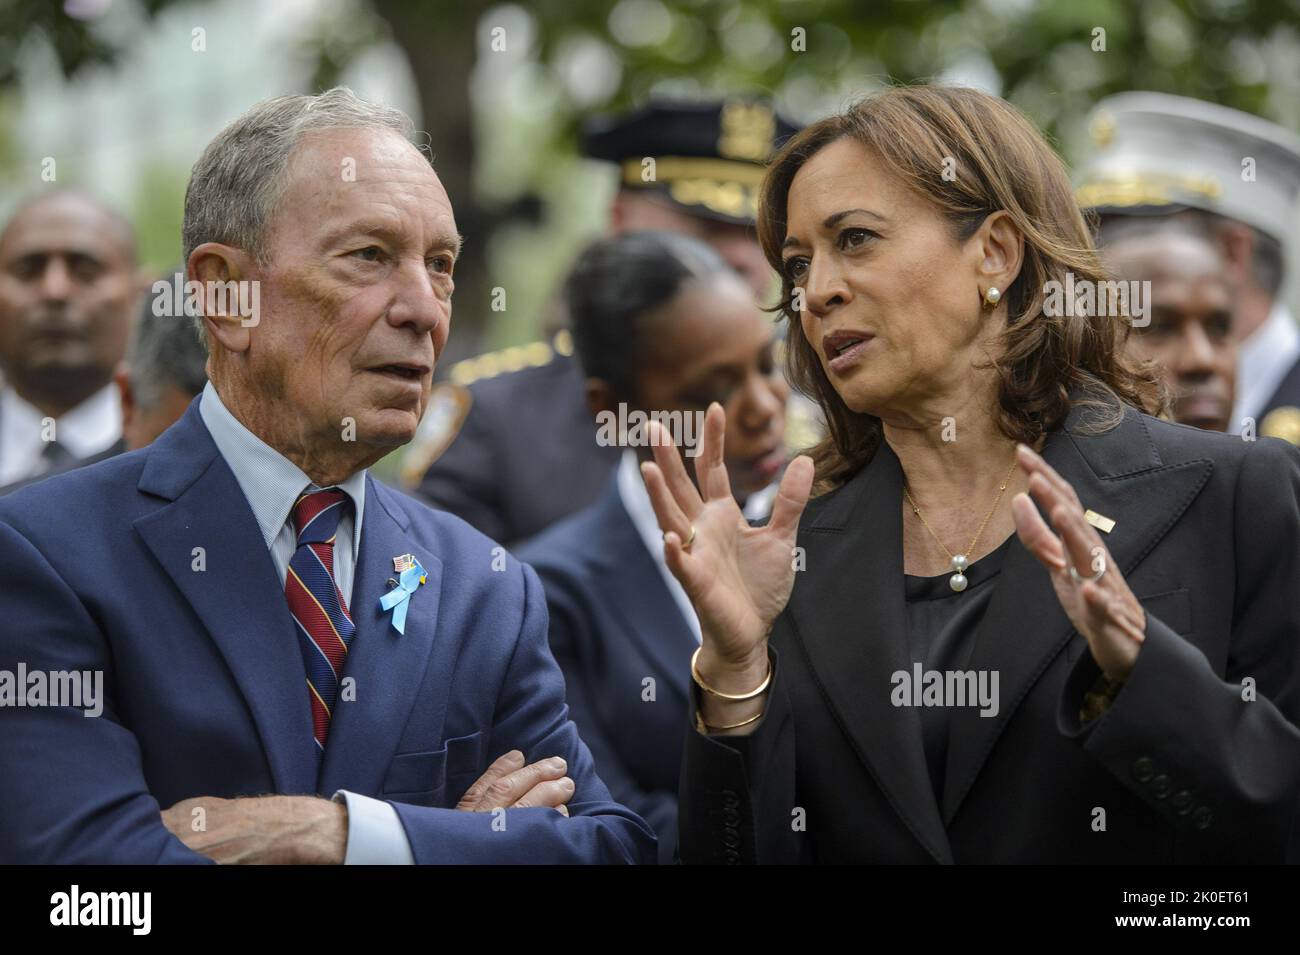 New York, United States. 11th Sep, 2022. Vice President Kamala Harris and former Mayor of New York City Mike Bloomberg speak during a commemoration ceremony at the National September 11th Memorial in New York City on Sunday, September 11, 2022. Photo by Bonnie Cash/UPI Credit: UPI/Alamy Live News Stock Photo